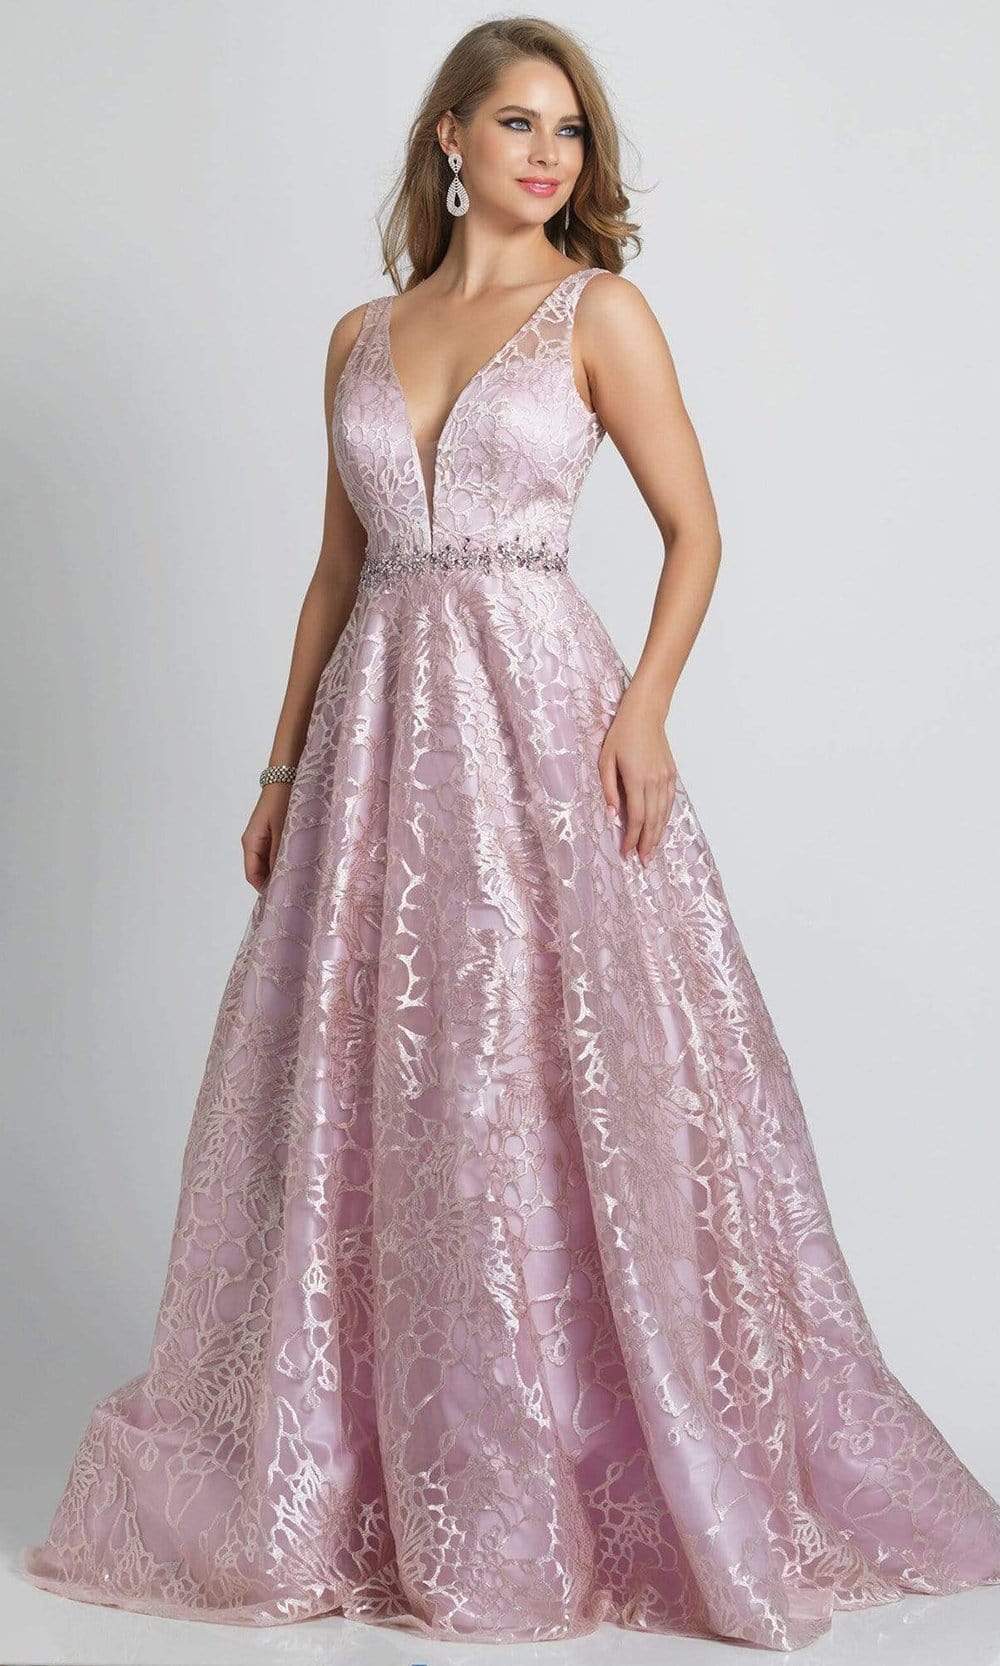 Dave & Johnny - Floral Lace Overlay A-line Dress A9385SC  In Pink